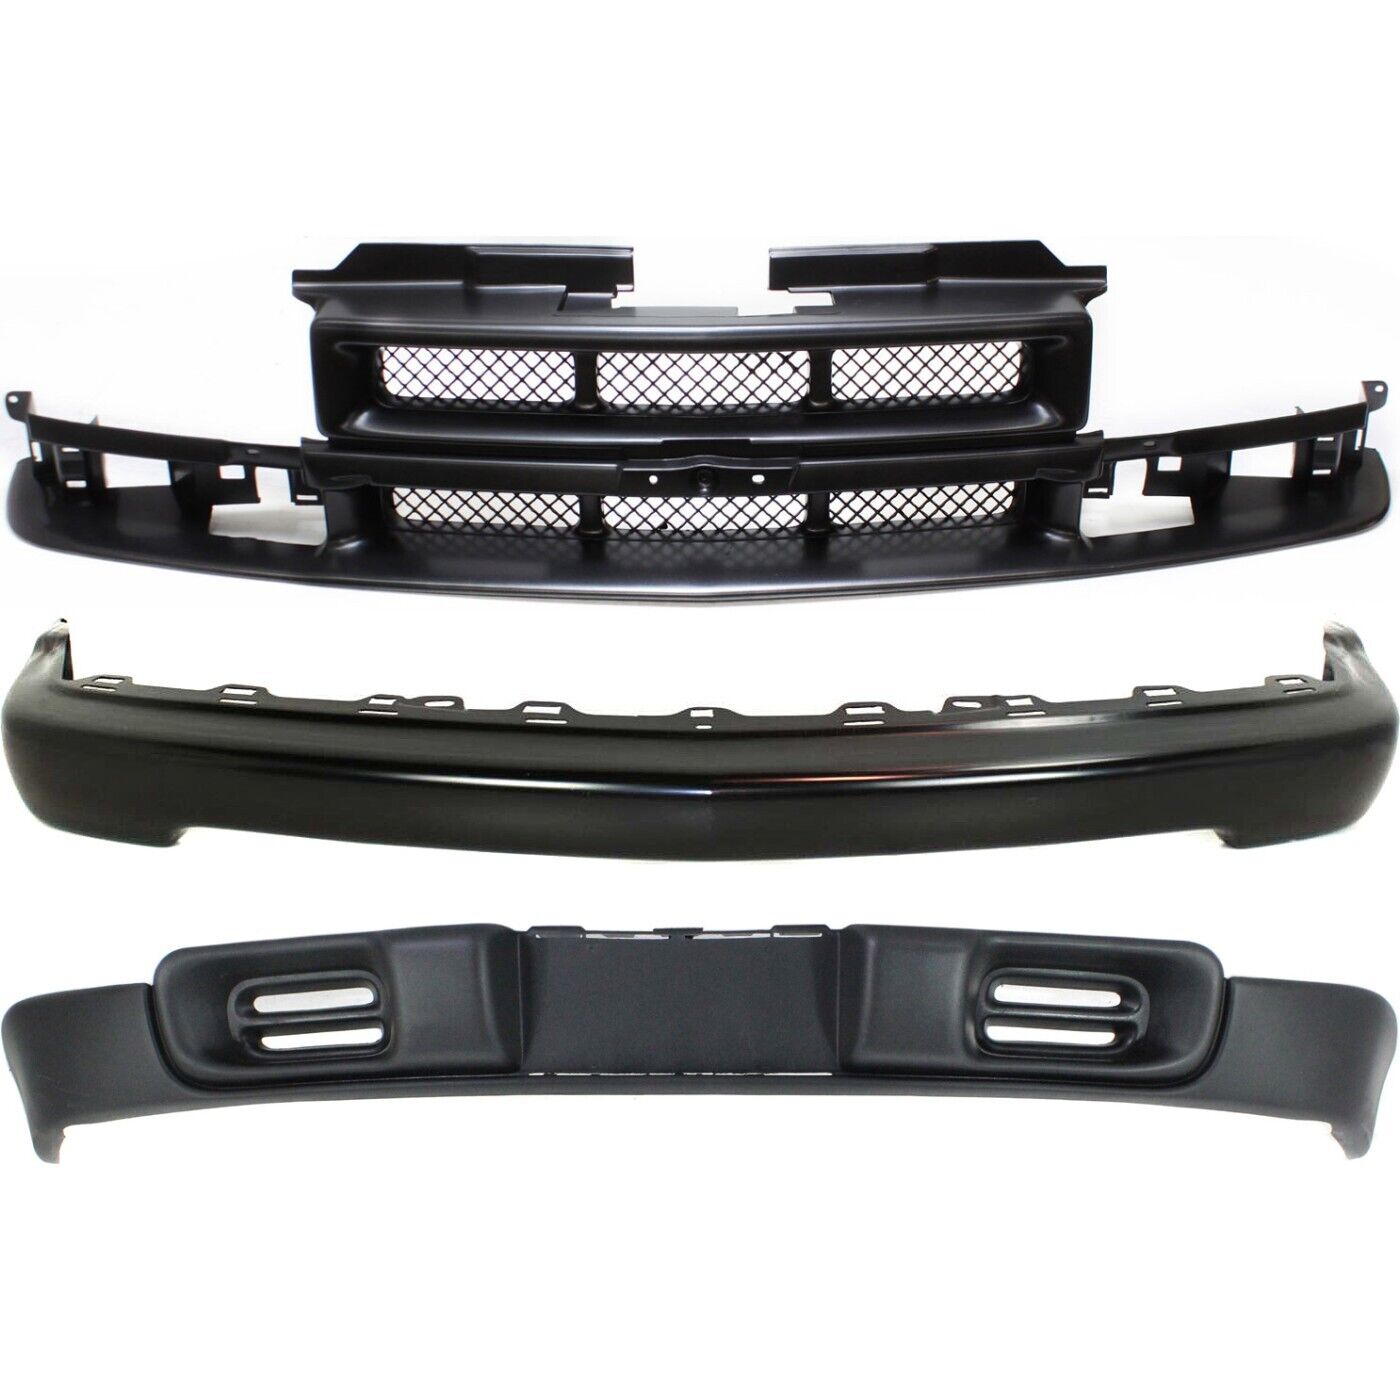 Bumper Face Bars Front for Chevy S10 Pickup Chevrolet Blazer S-10 1998-2003